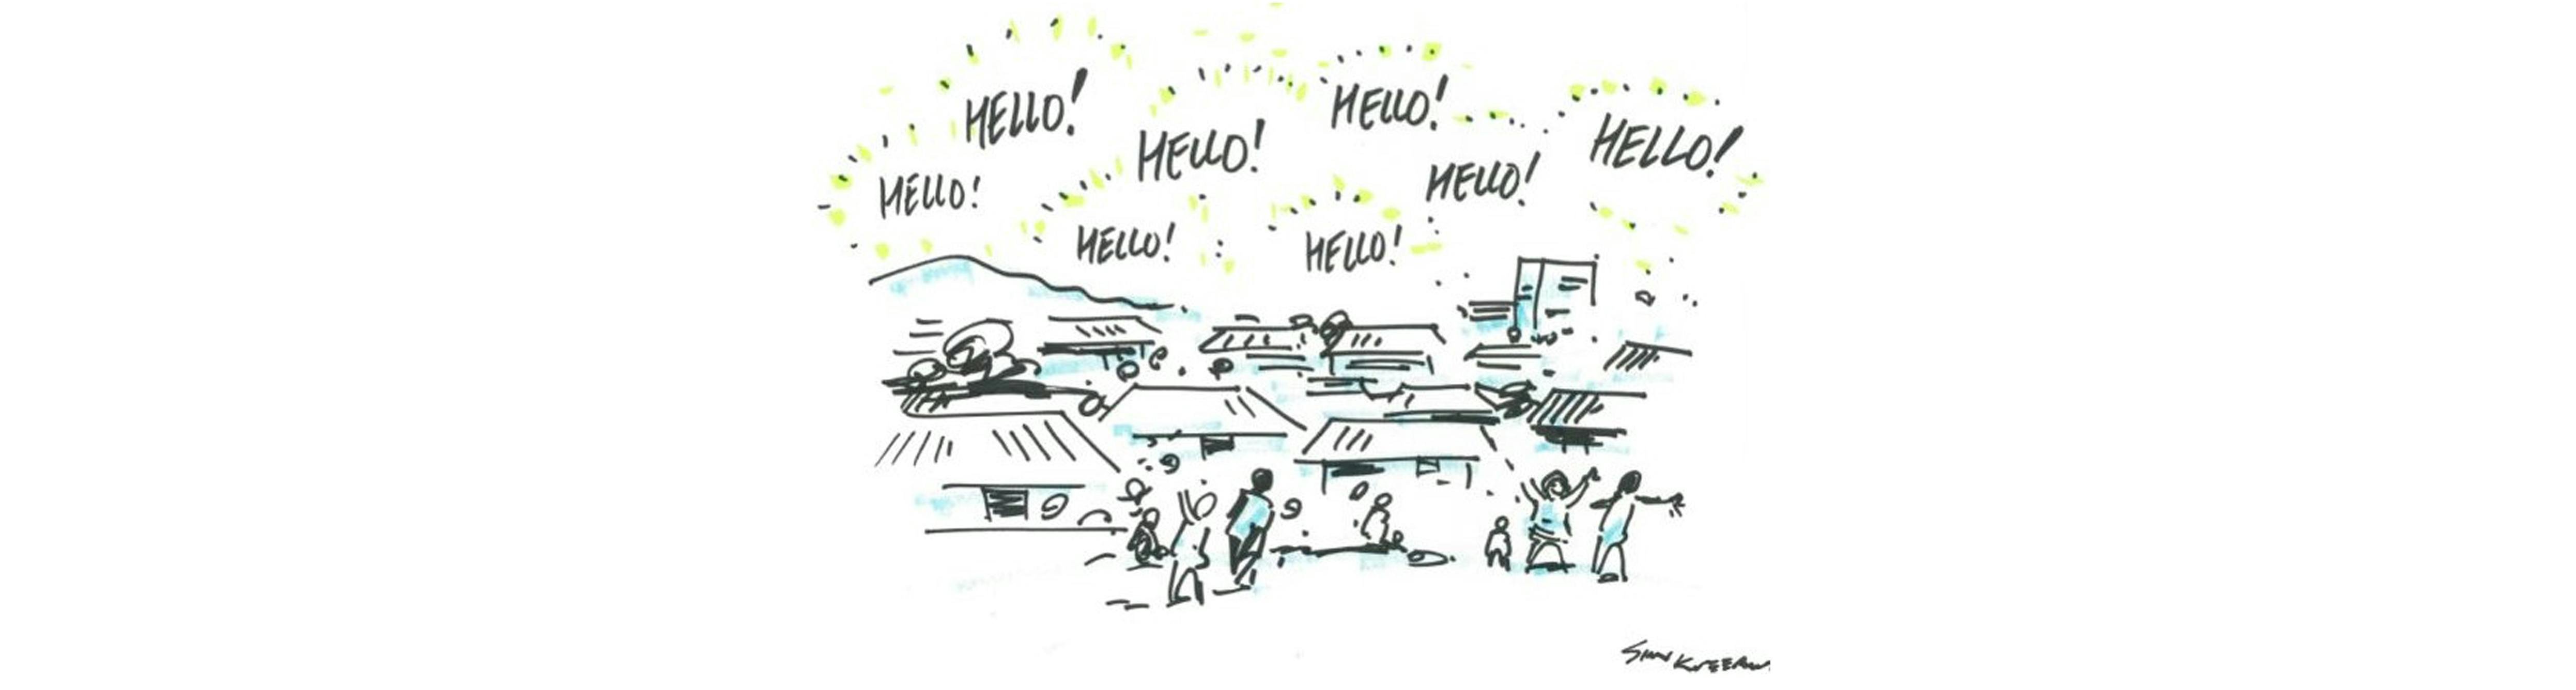 Cartoon illustration of houses people in community saying hello